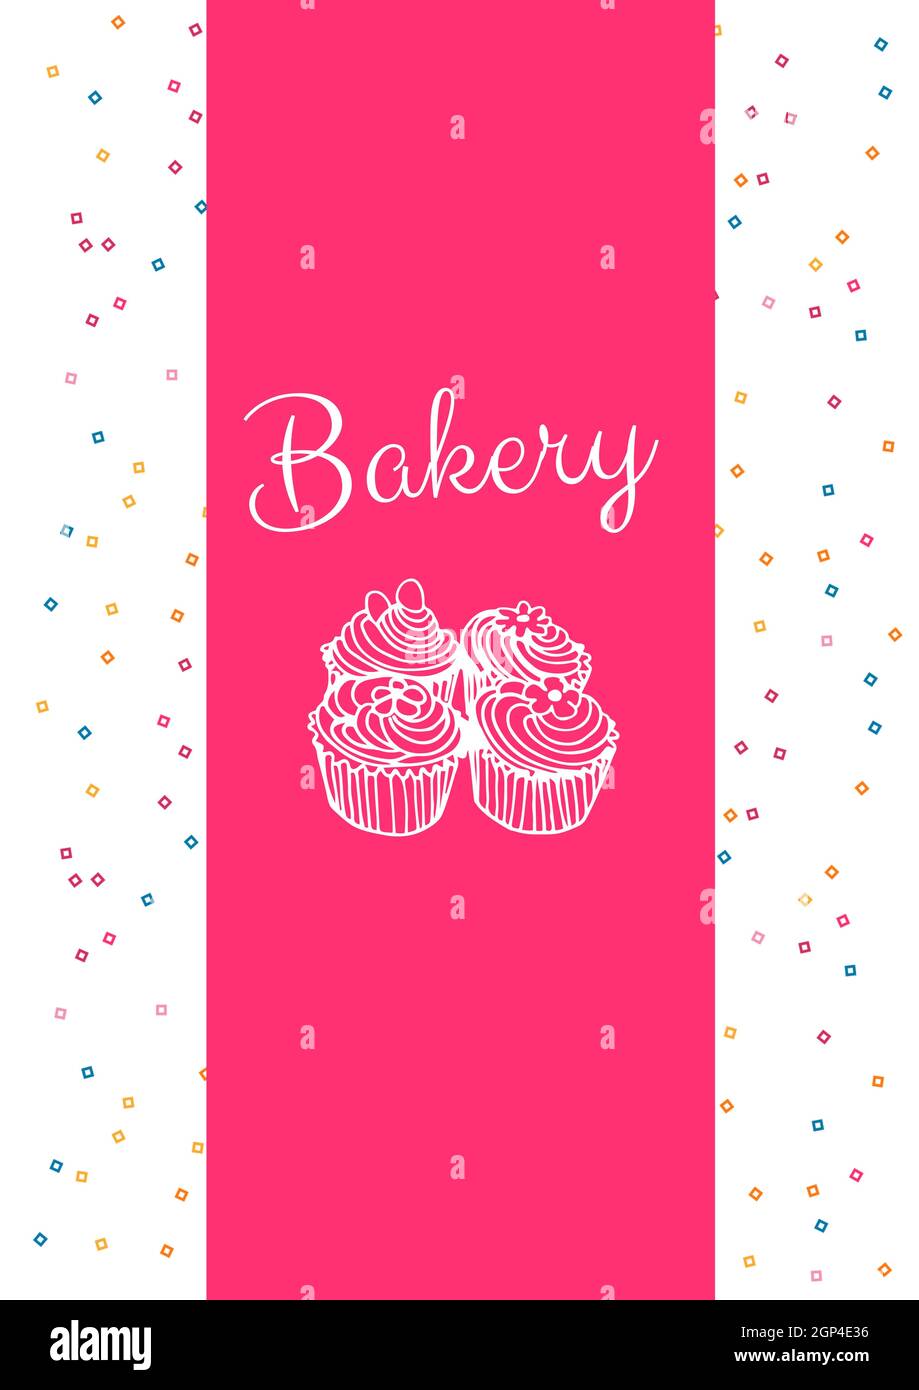 Composition of bakery text and cupcake icons on white and pink background Stock Photo